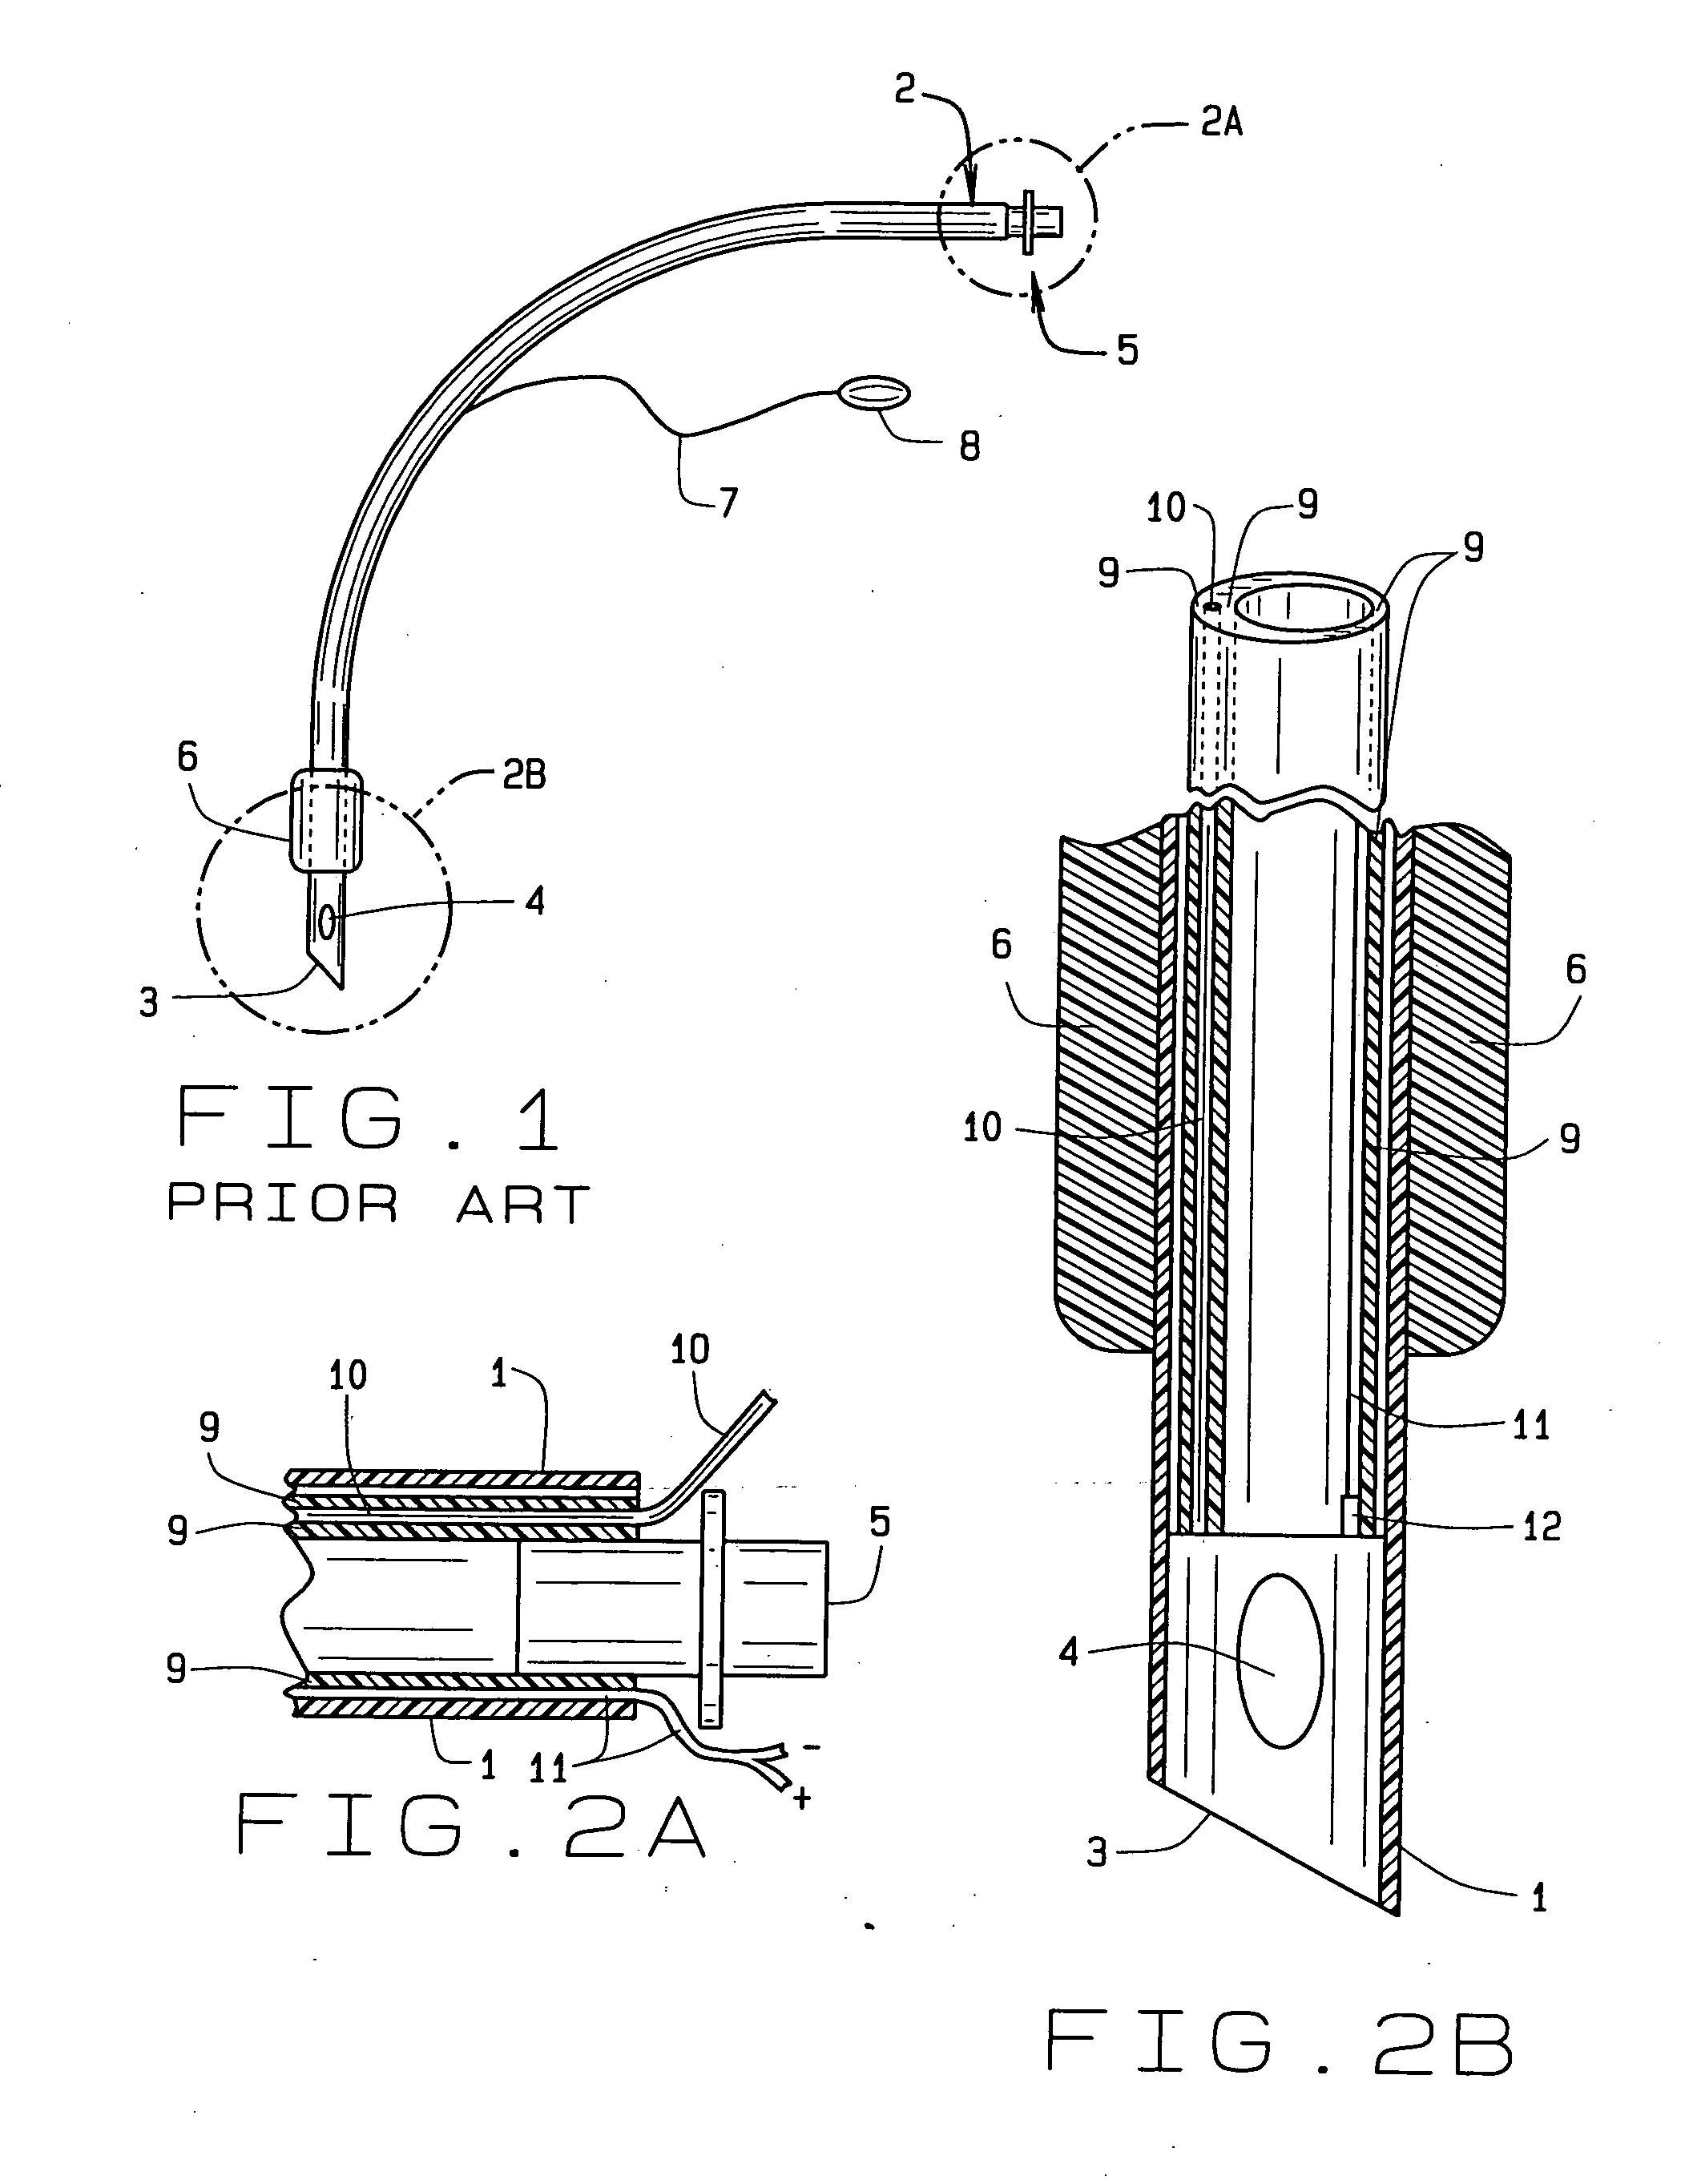 Tubular device delivering light and radiation into a patient